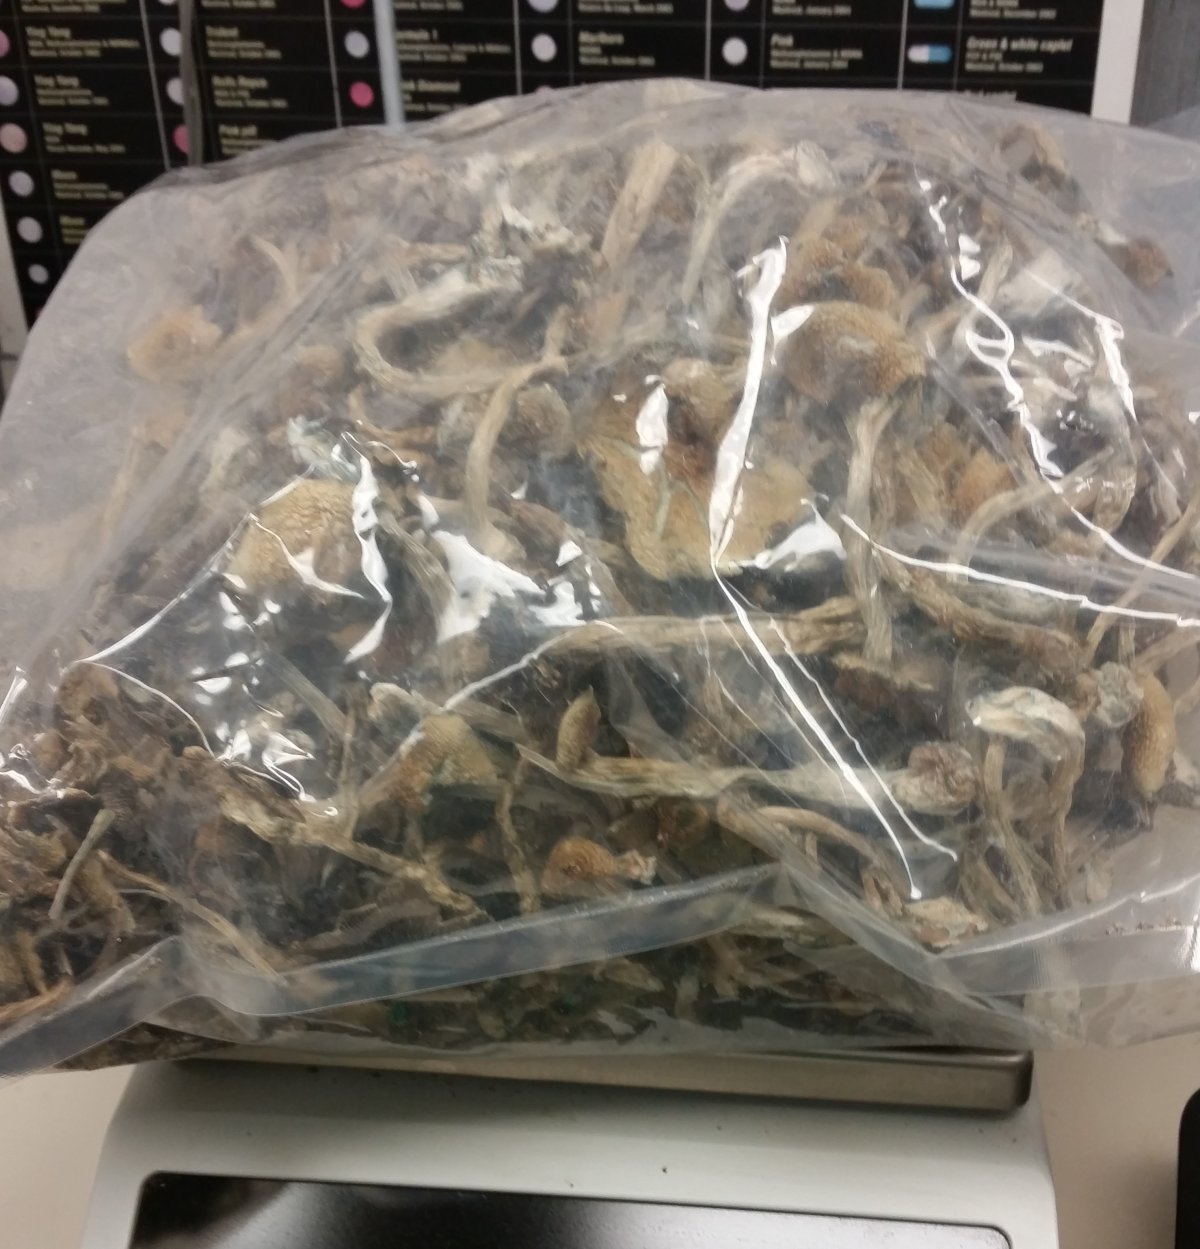 FILE: A bag of magic mushrooms is shown in this file photo.